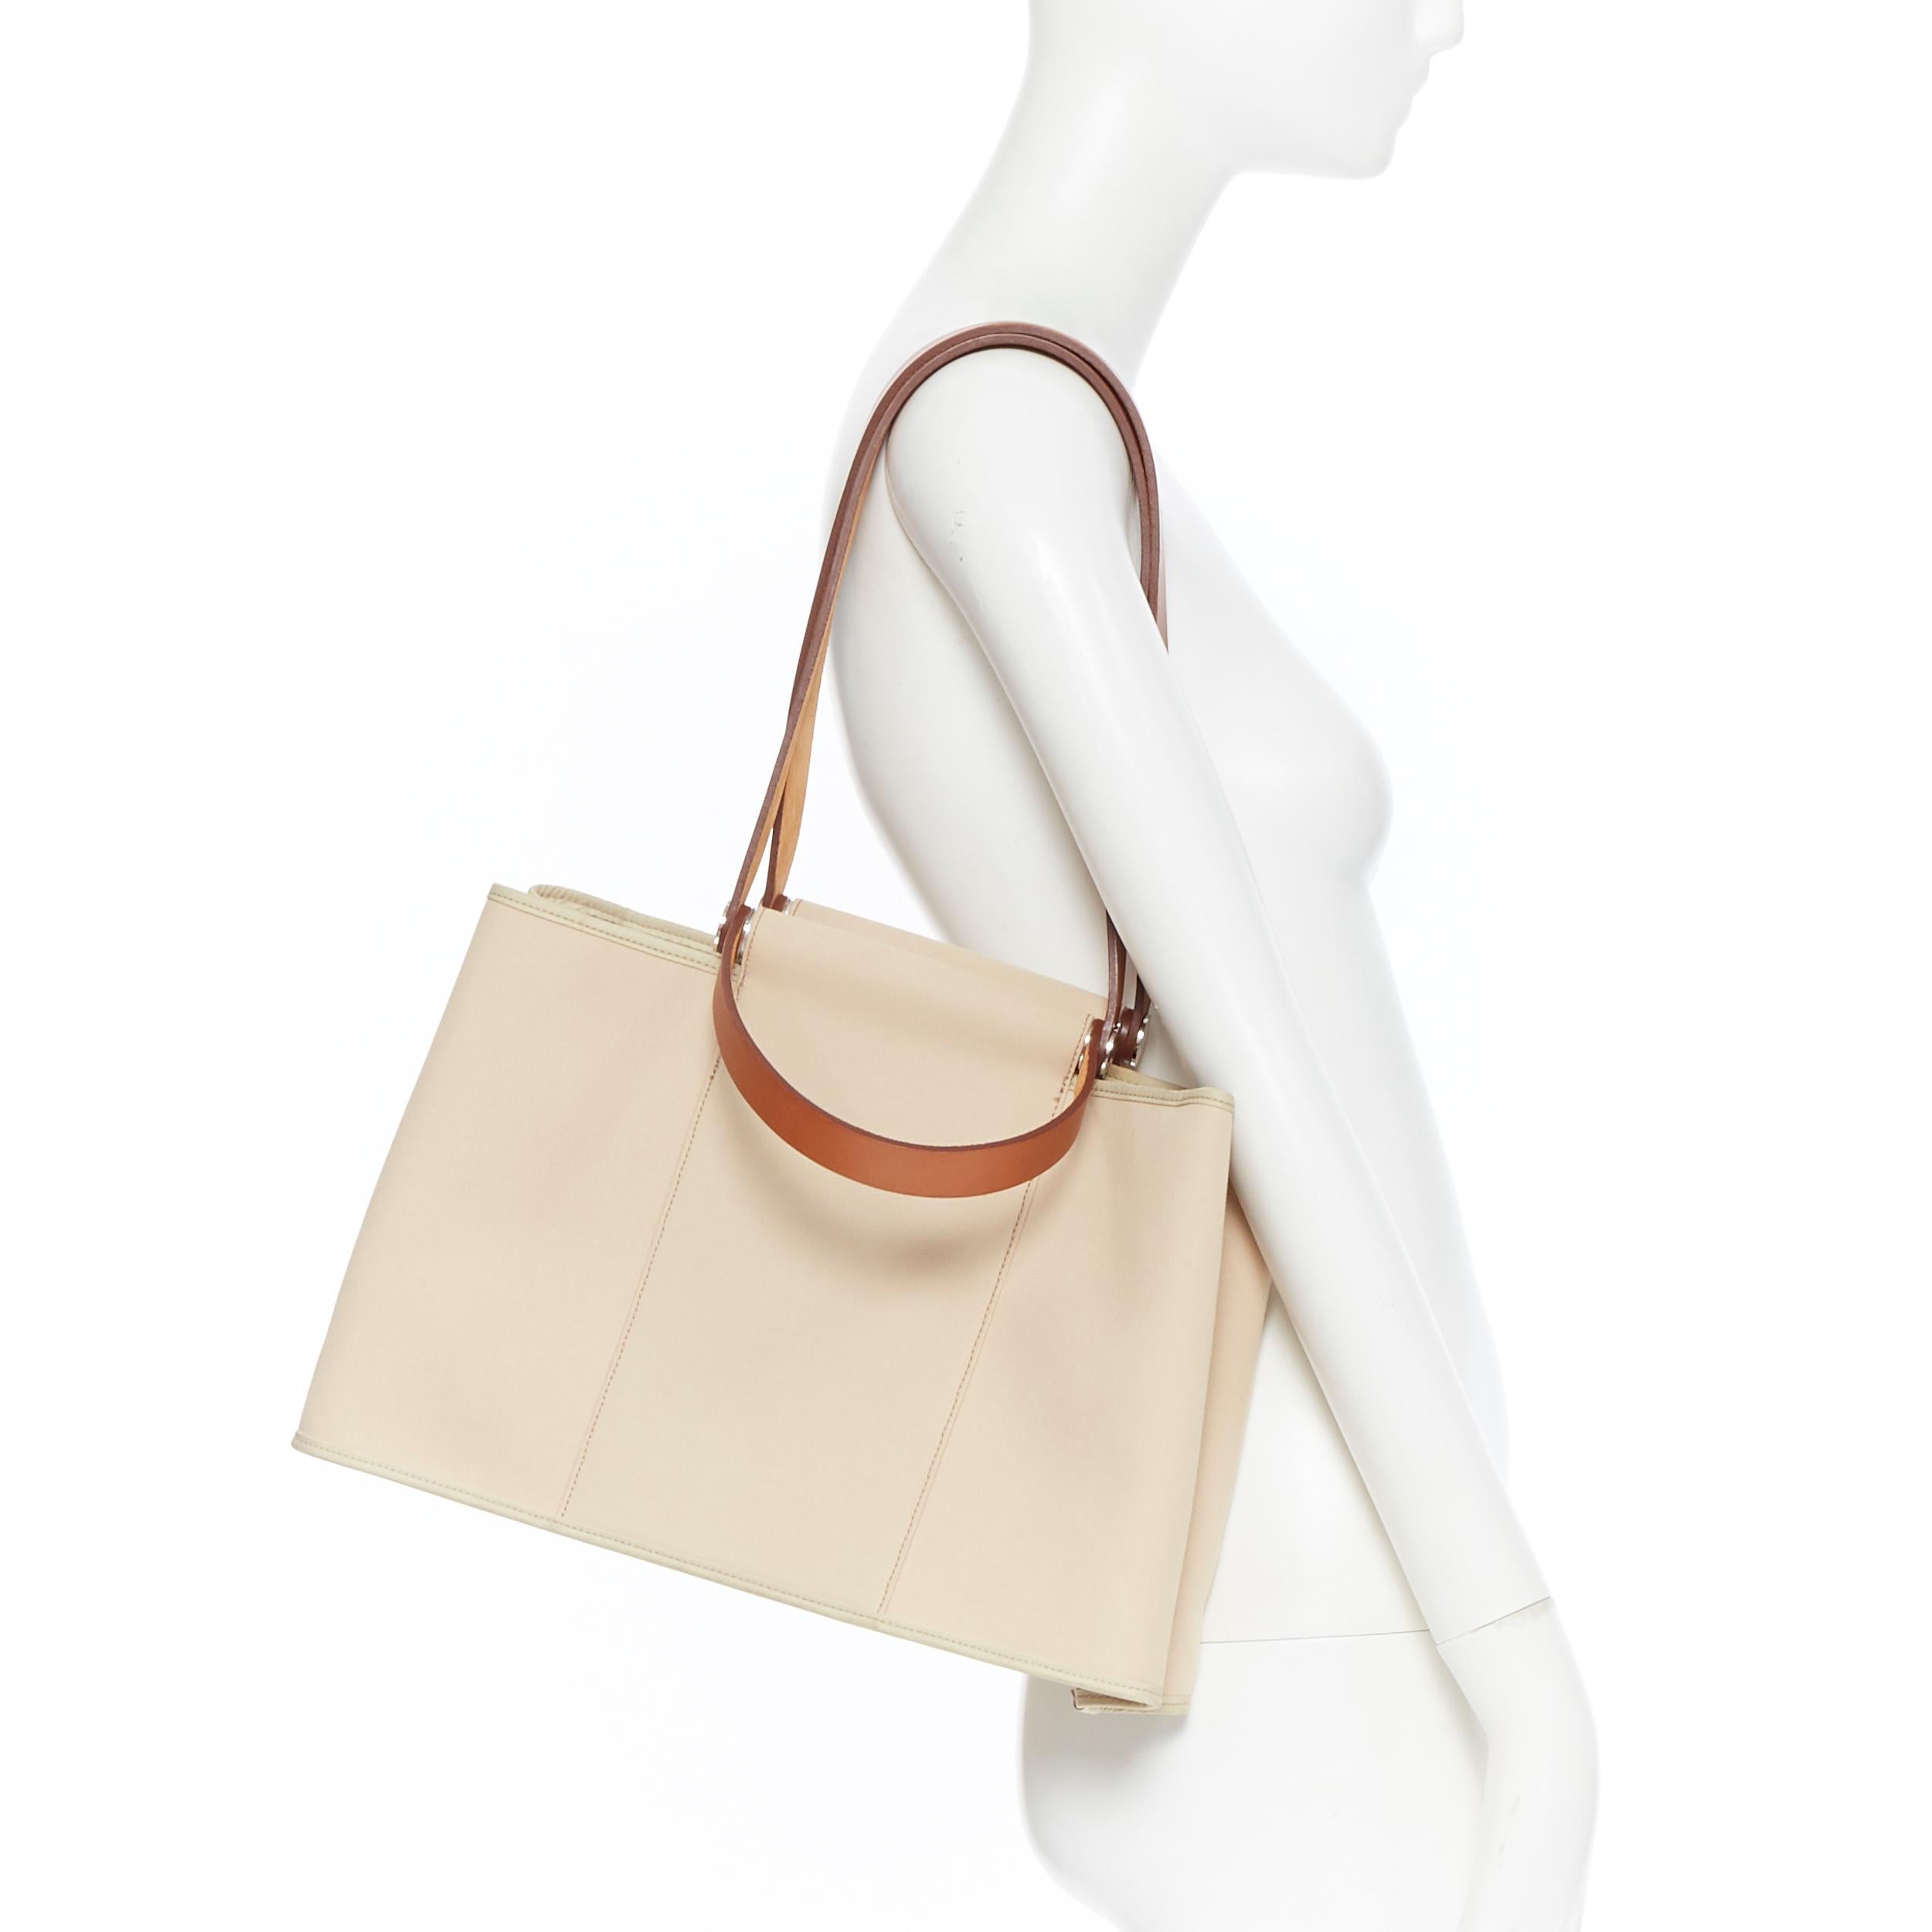 HERMES Toile H Cabag Elan Etoupe canvas tan leather expandable shoulder tote bag
Brand: Hermes
Model Name / Style: Cabag Elan
Material: Fabric; leather trimming
Color: Beige
Pattern: Solid
Lining material: Fabric
Extra Detail: Ecru Toile H canvas